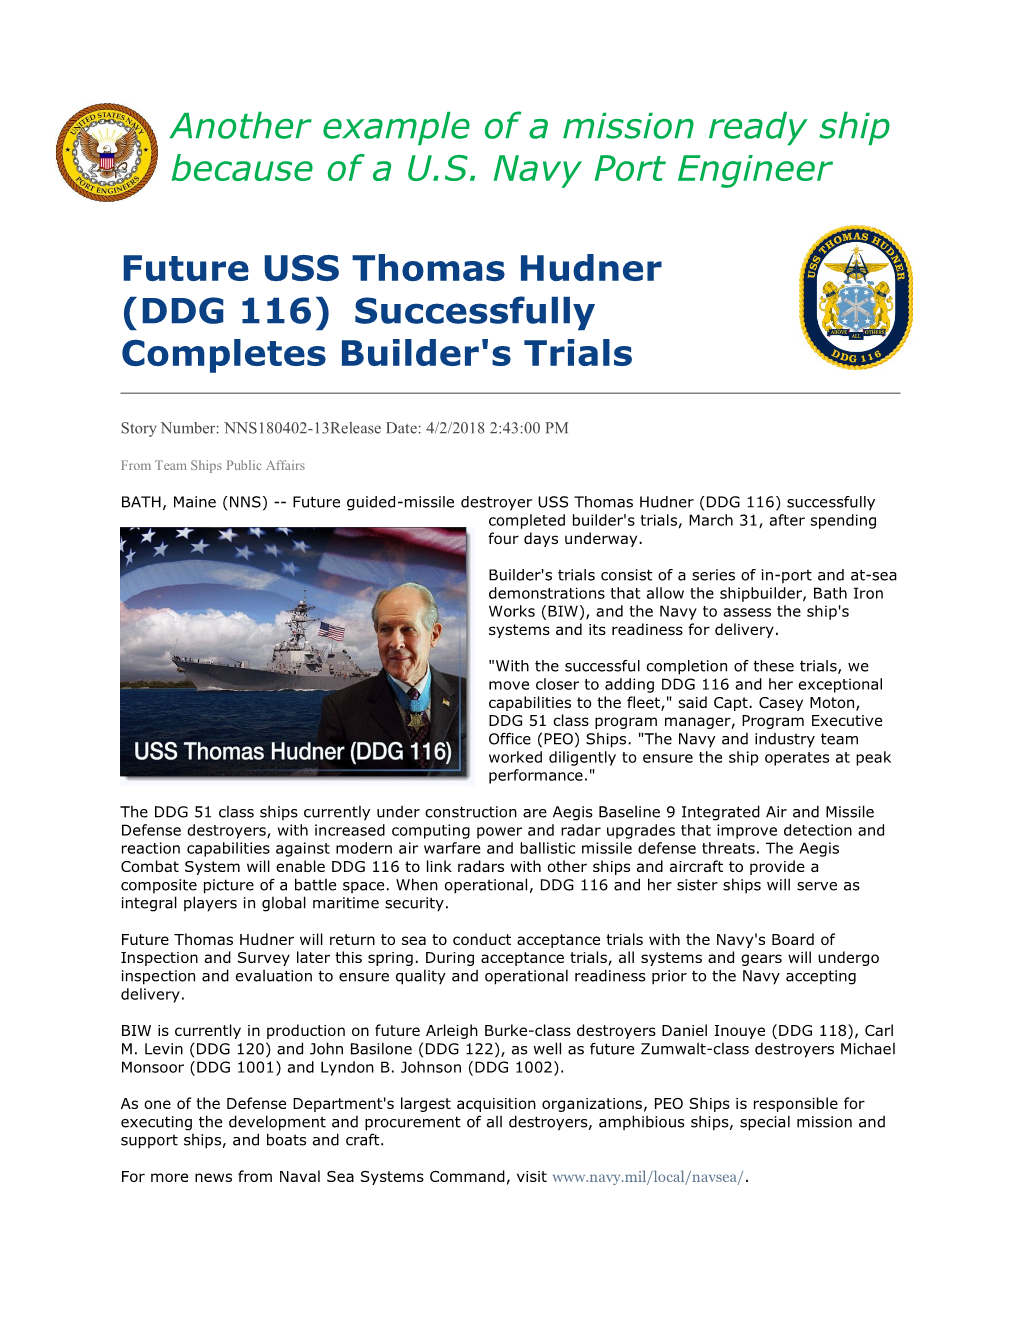 Future USS Thomas Hudner (DDG 116) Successfully Completes Builder's Trials